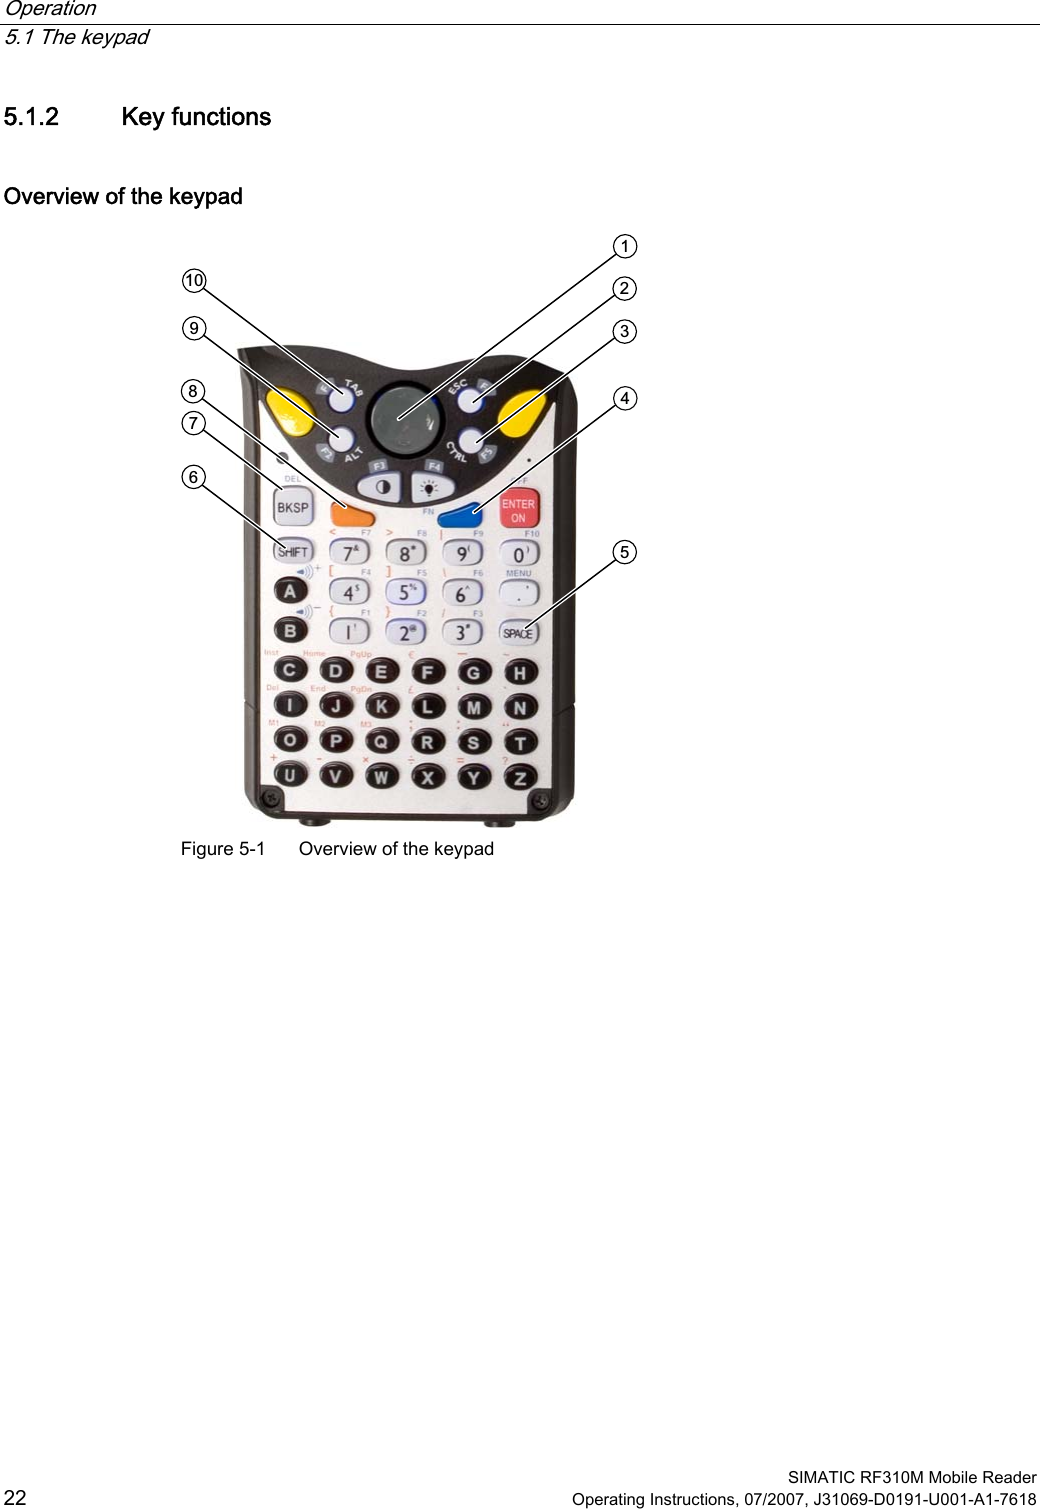 Operation   5.1 The keypad  SIMATIC RF310M Mobile Reader 22 Operating Instructions, 07/2007, J31069-D0191-U001-A1-7618 5.1.2 Key functions Overview of the keypad  Figure 5-1  Overview of the keypad 